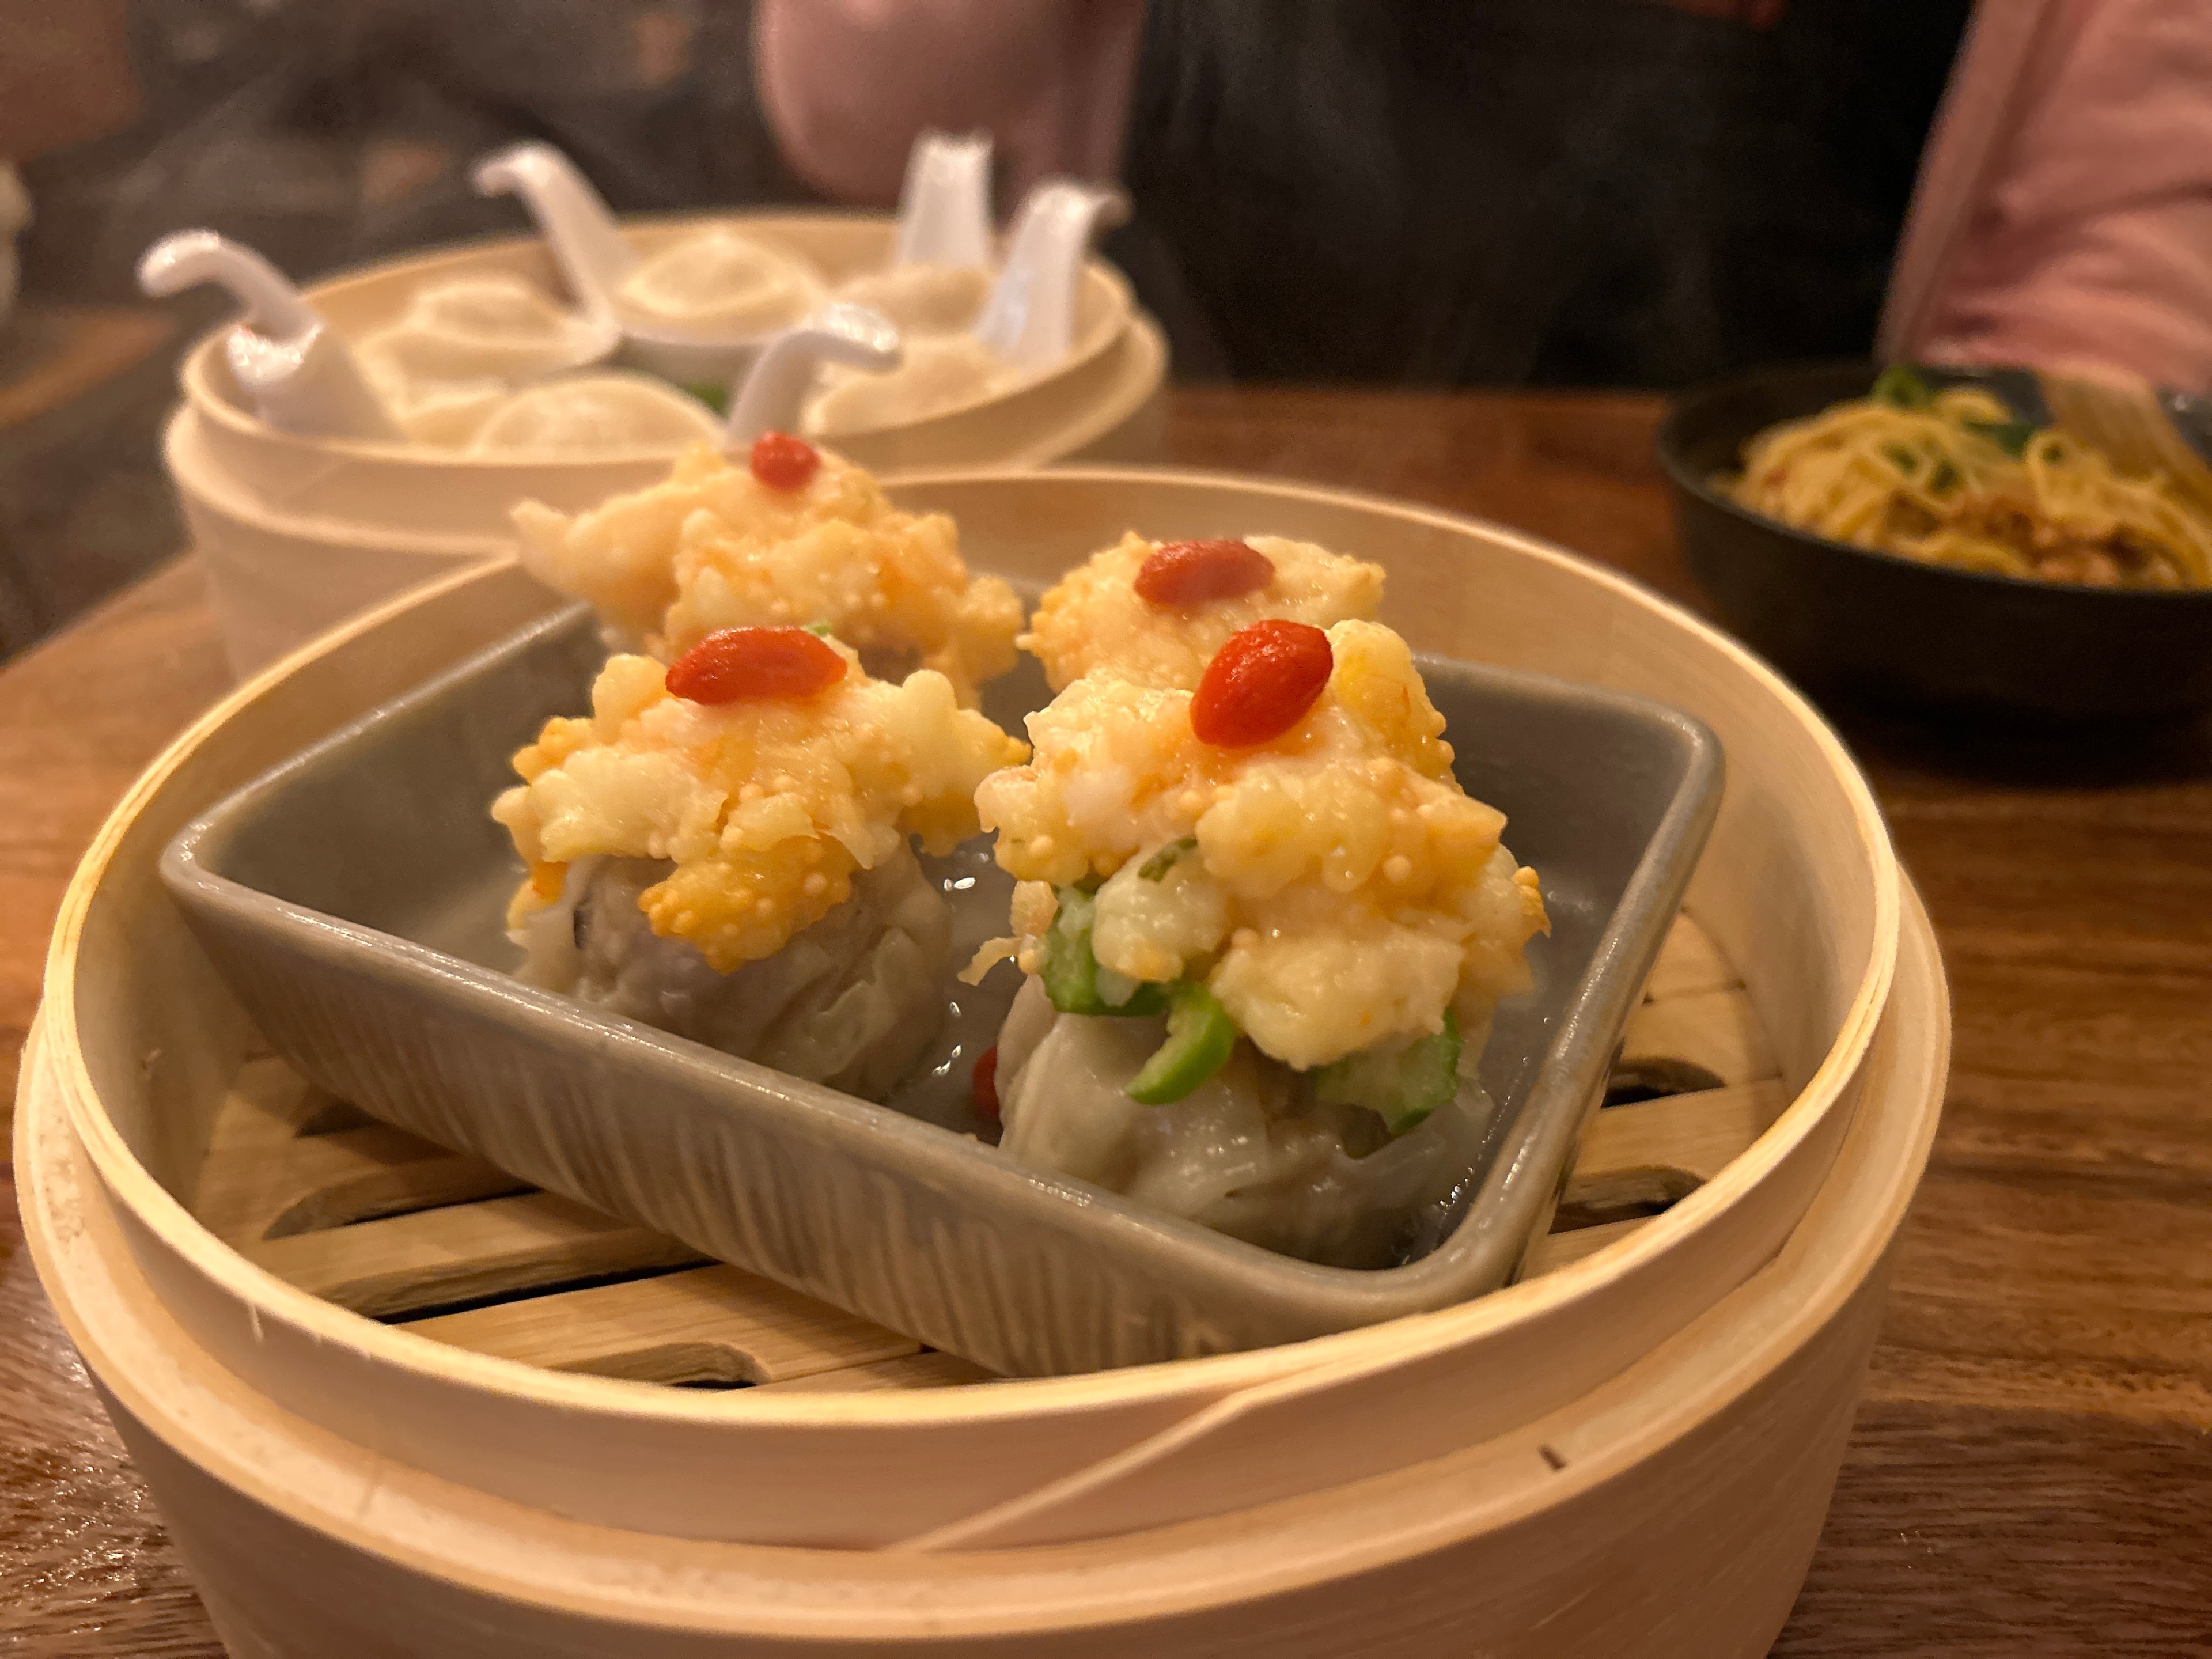 Pork shumai sits in a dim sum basket on a table with other East Asian dishes.